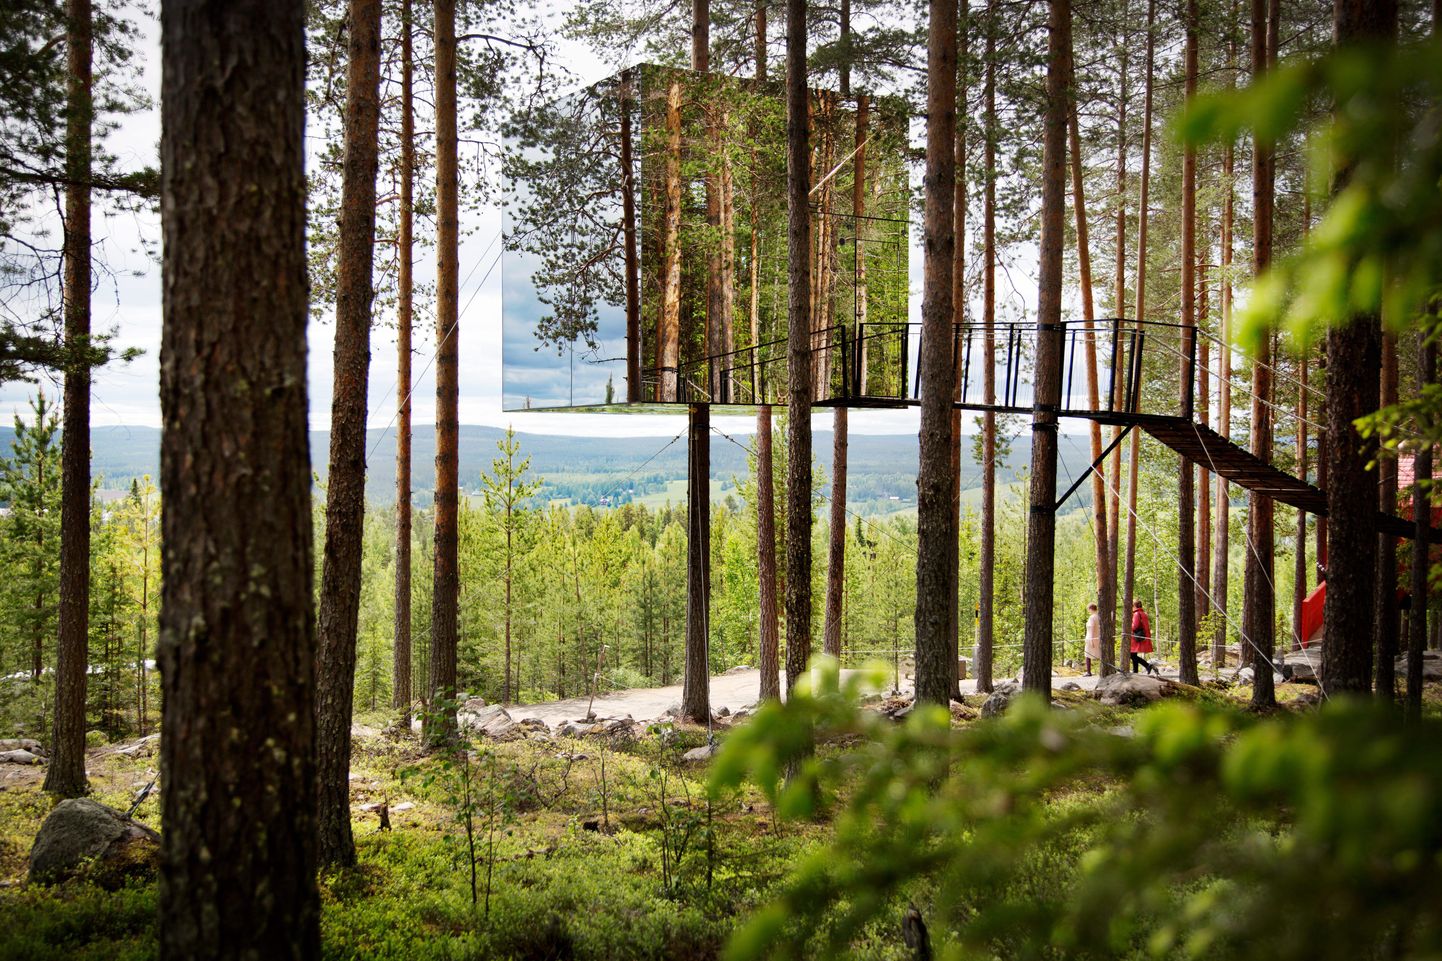 HARADS 20120618
Treehotel. A Hotel where guests stay in rooms, cabins in the trees. "Mirror cube". 
Foto Thomas Karlsson / SCANPIX / Kod 11126